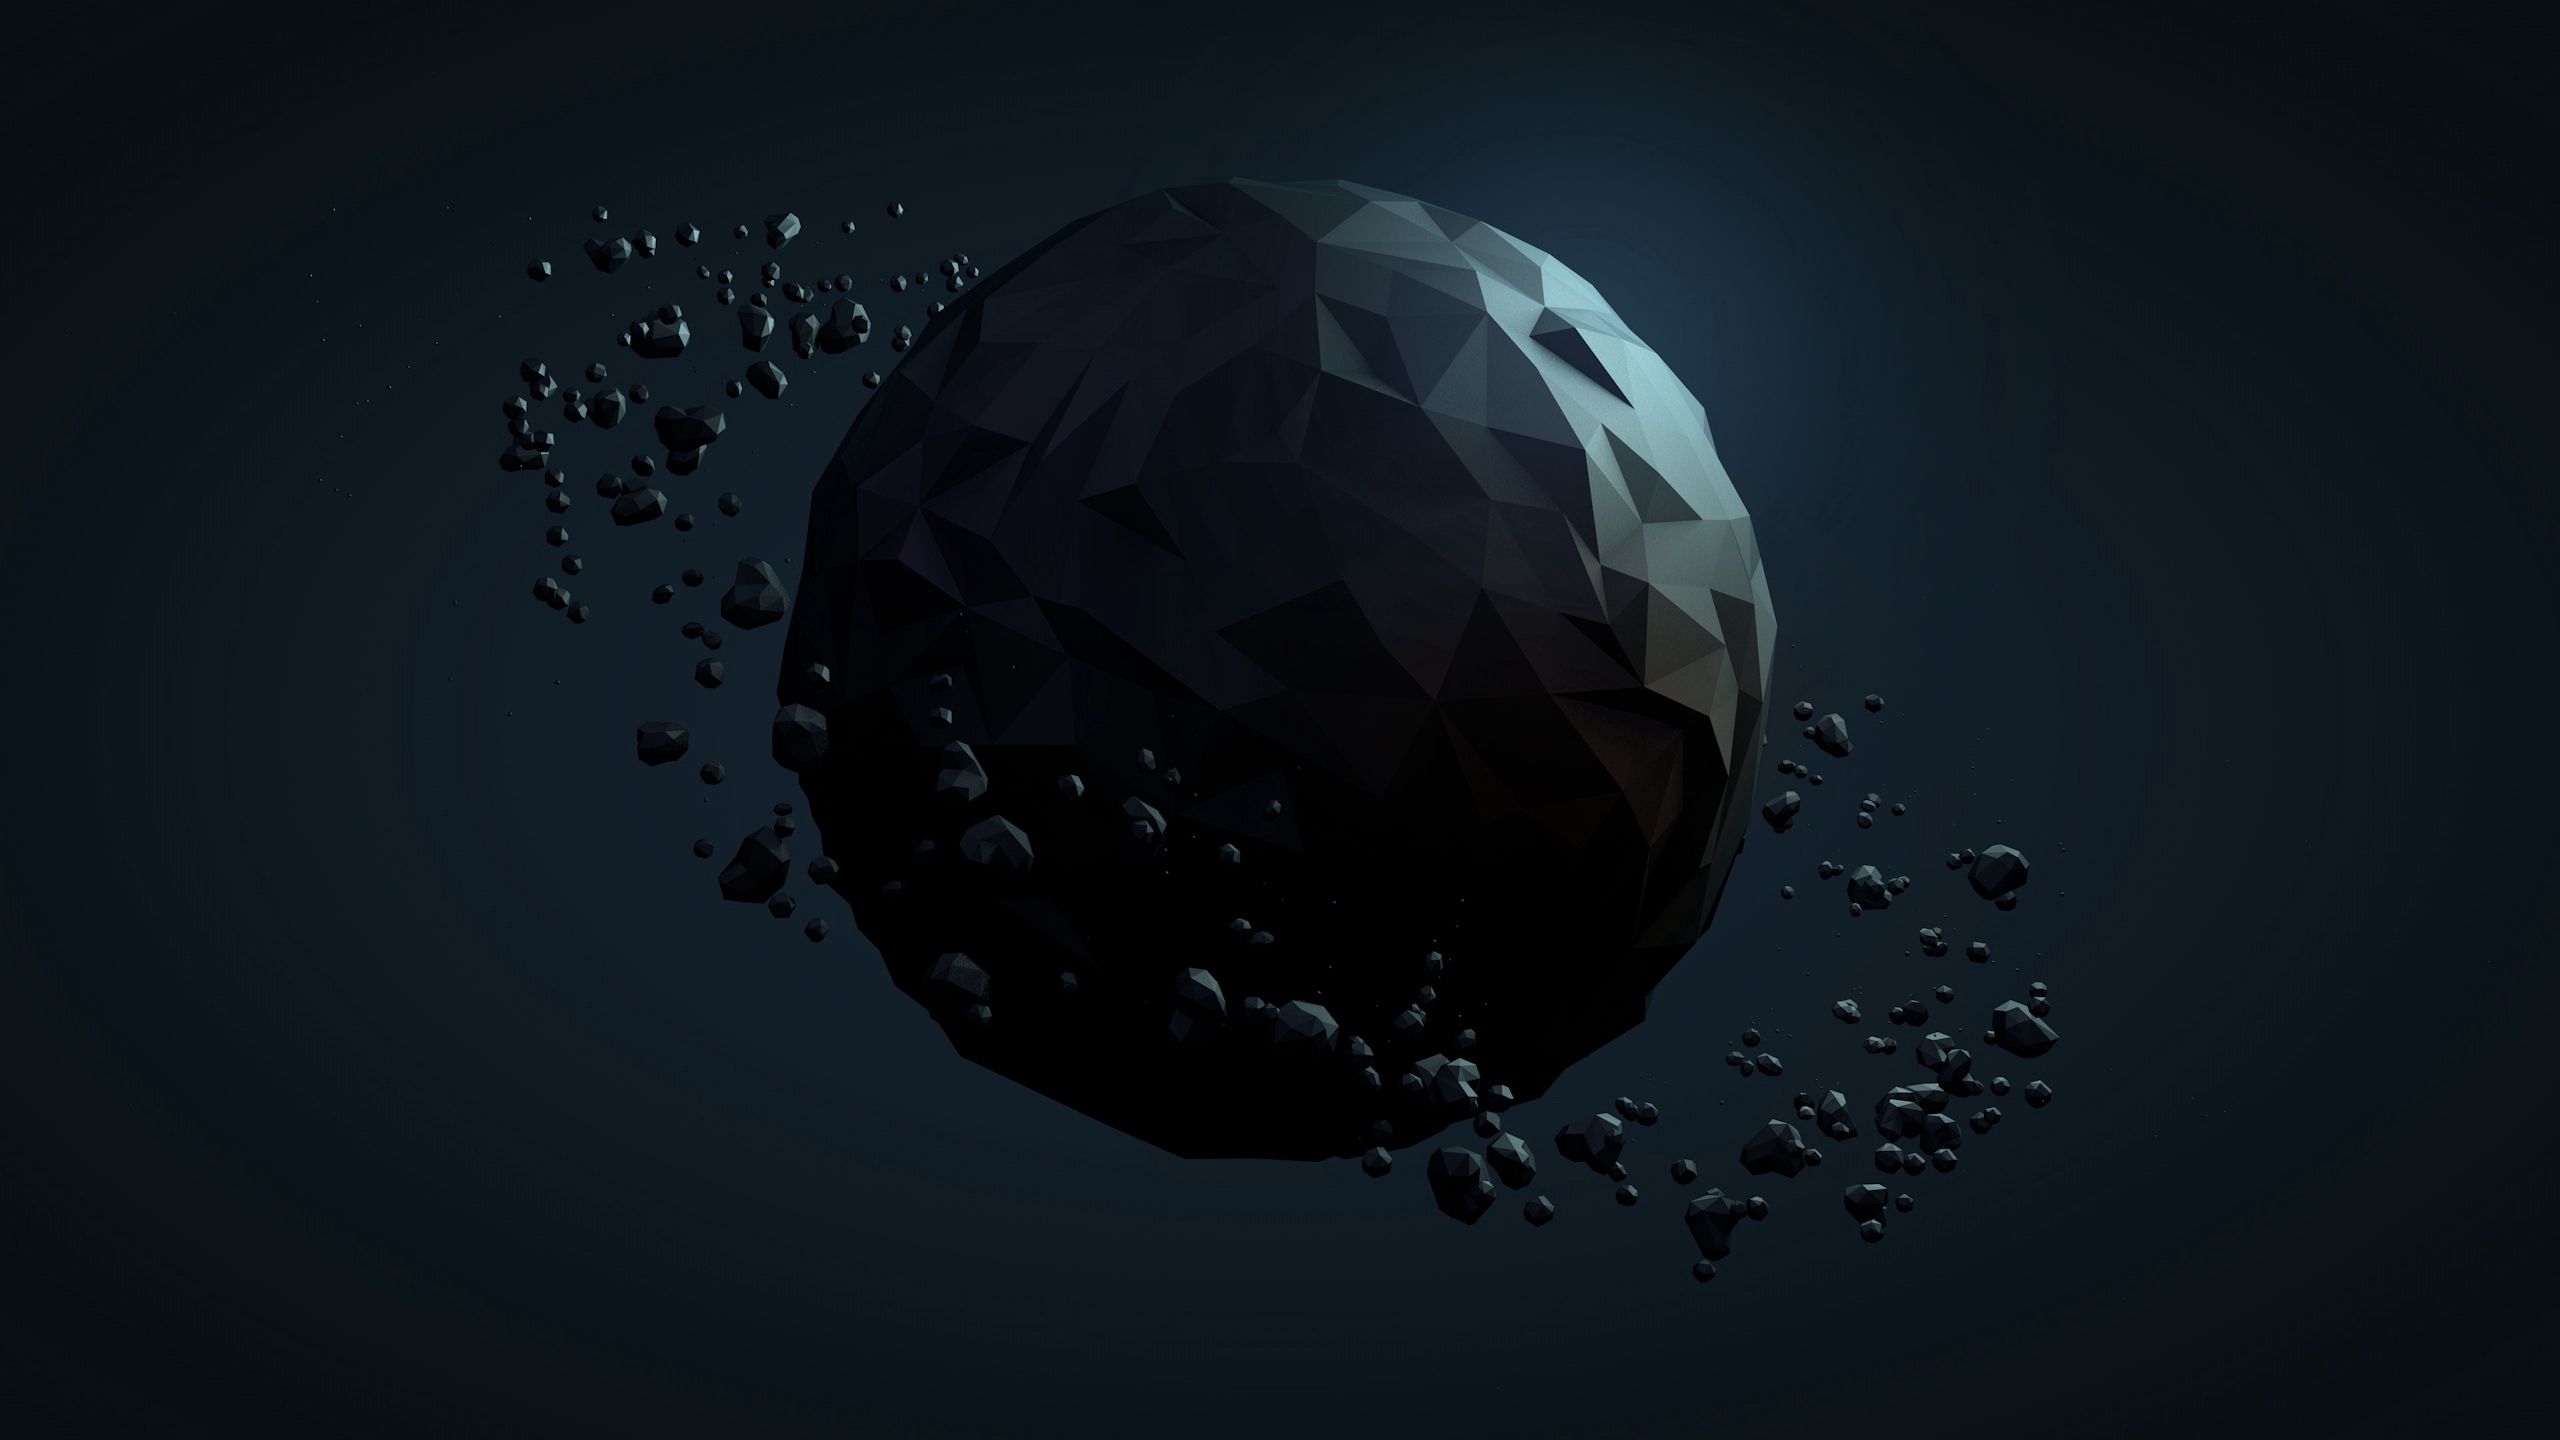 dark, planet, abstract, background, ball